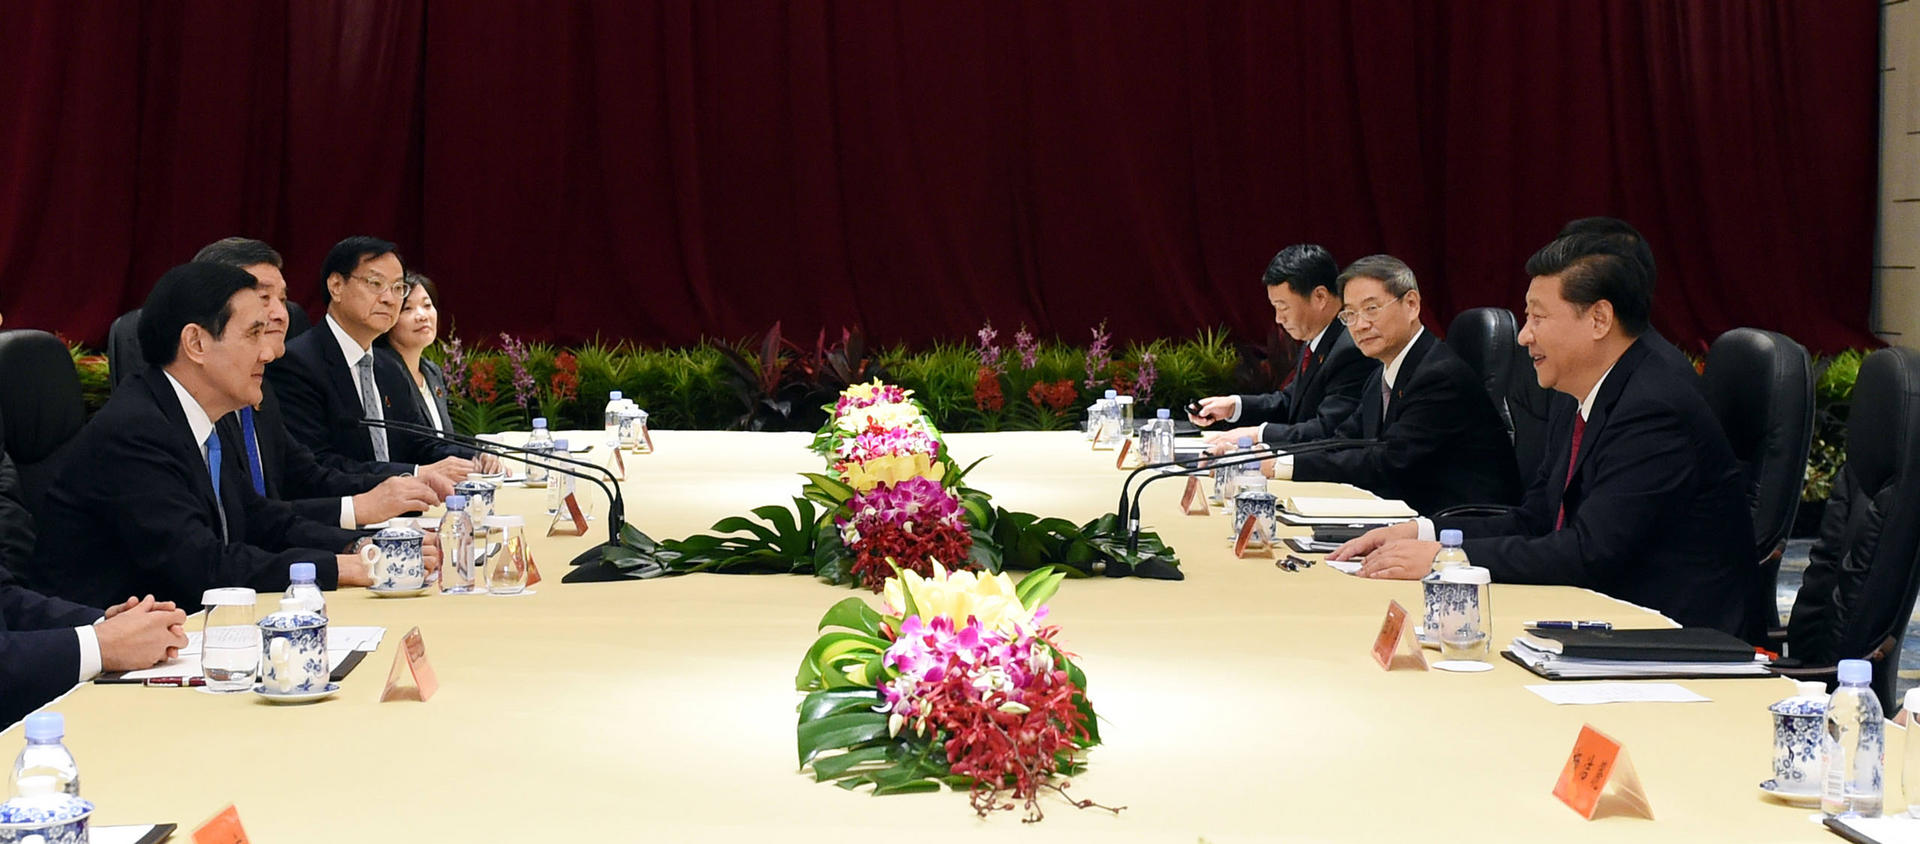 The Taiwanese delegation led by Ma Ying-jeou (far left) with the mainland side led by President Xi Jinping before their closed-door meeting in Singapore. Photo: Xinhua